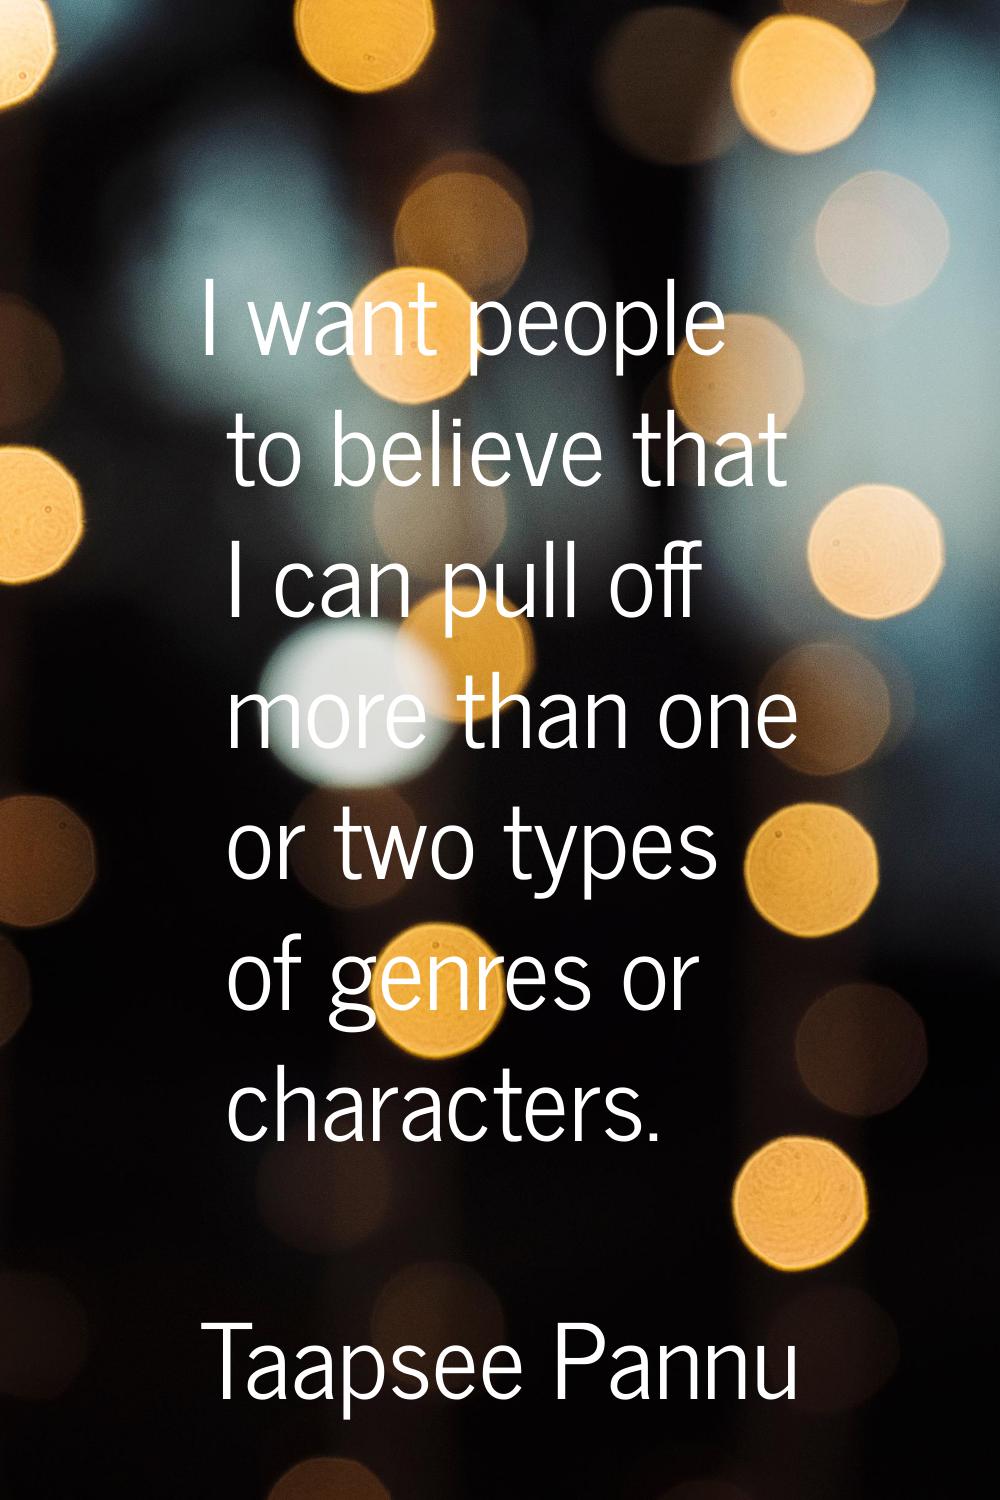 I want people to believe that I can pull off more than one or two types of genres or characters.